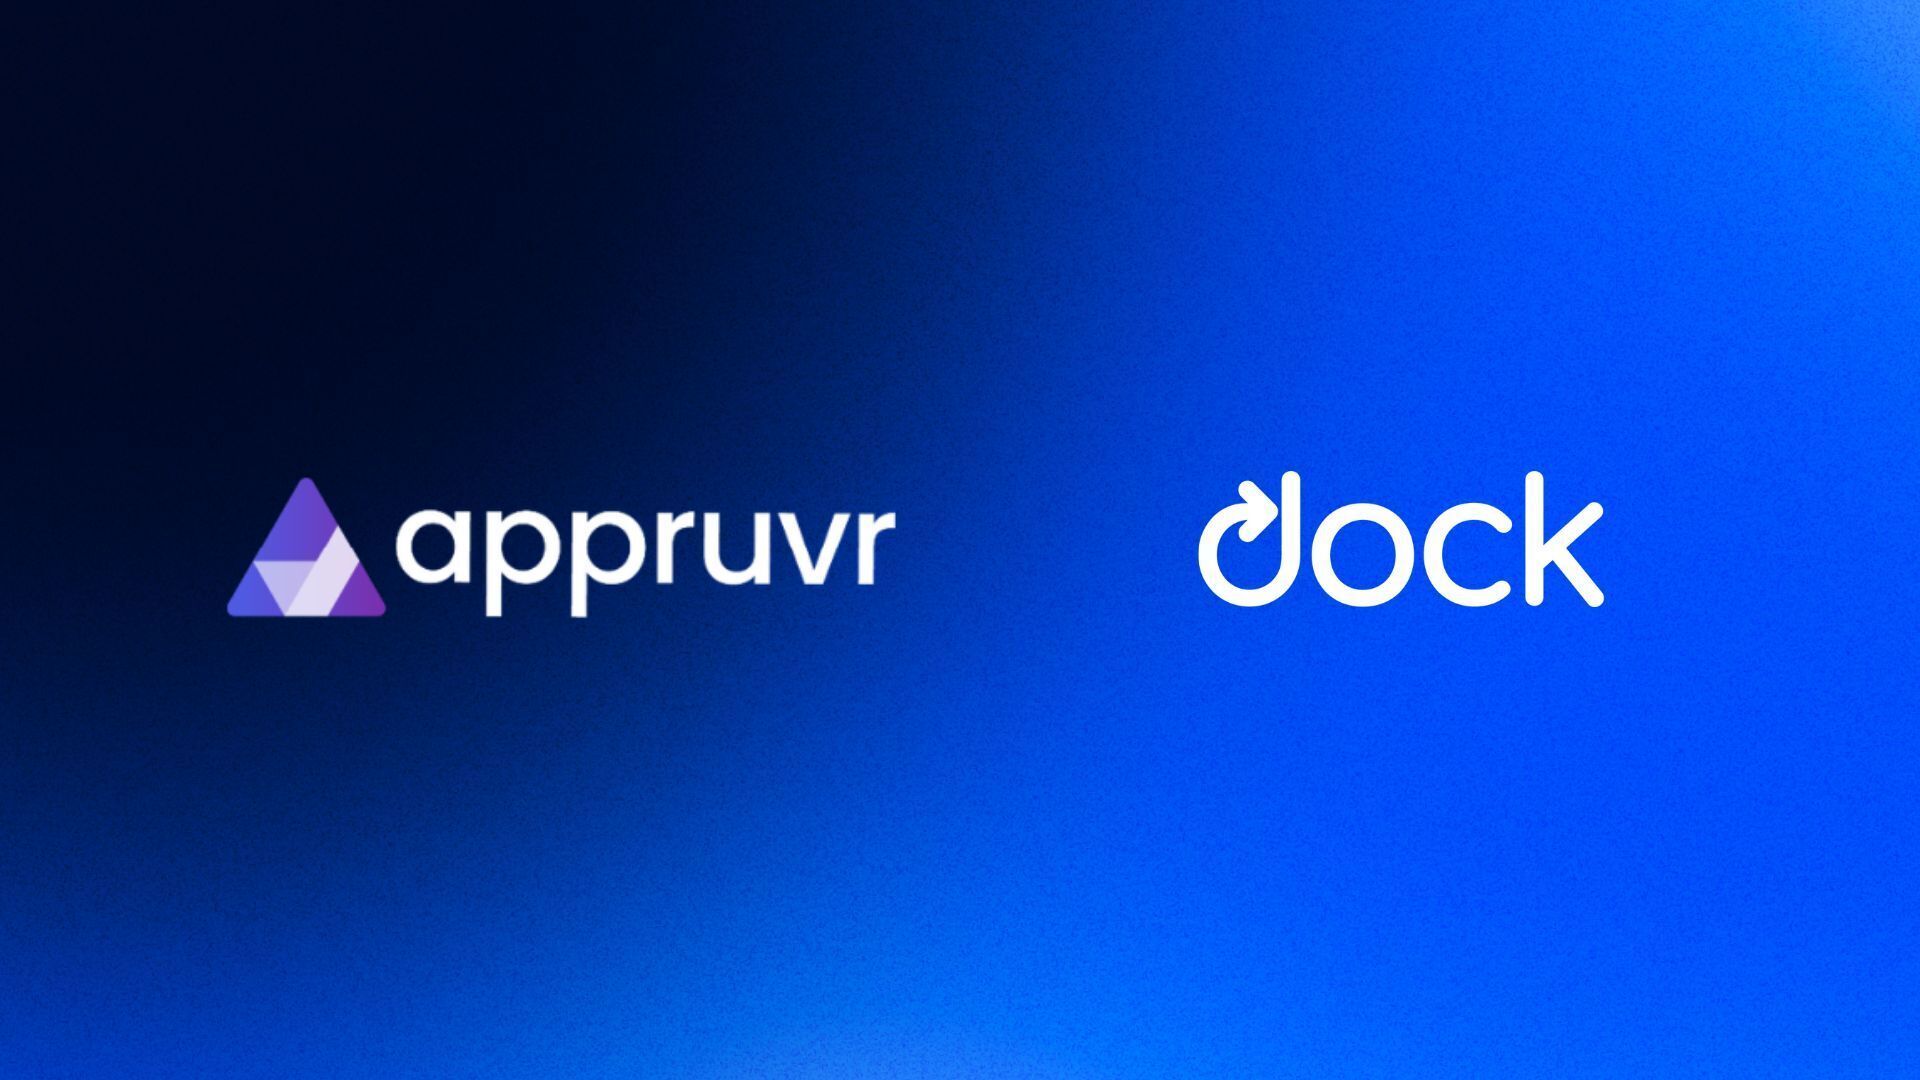 Appruvr Integrates Dock to Empower Organizations to Verify Credentials Instantly